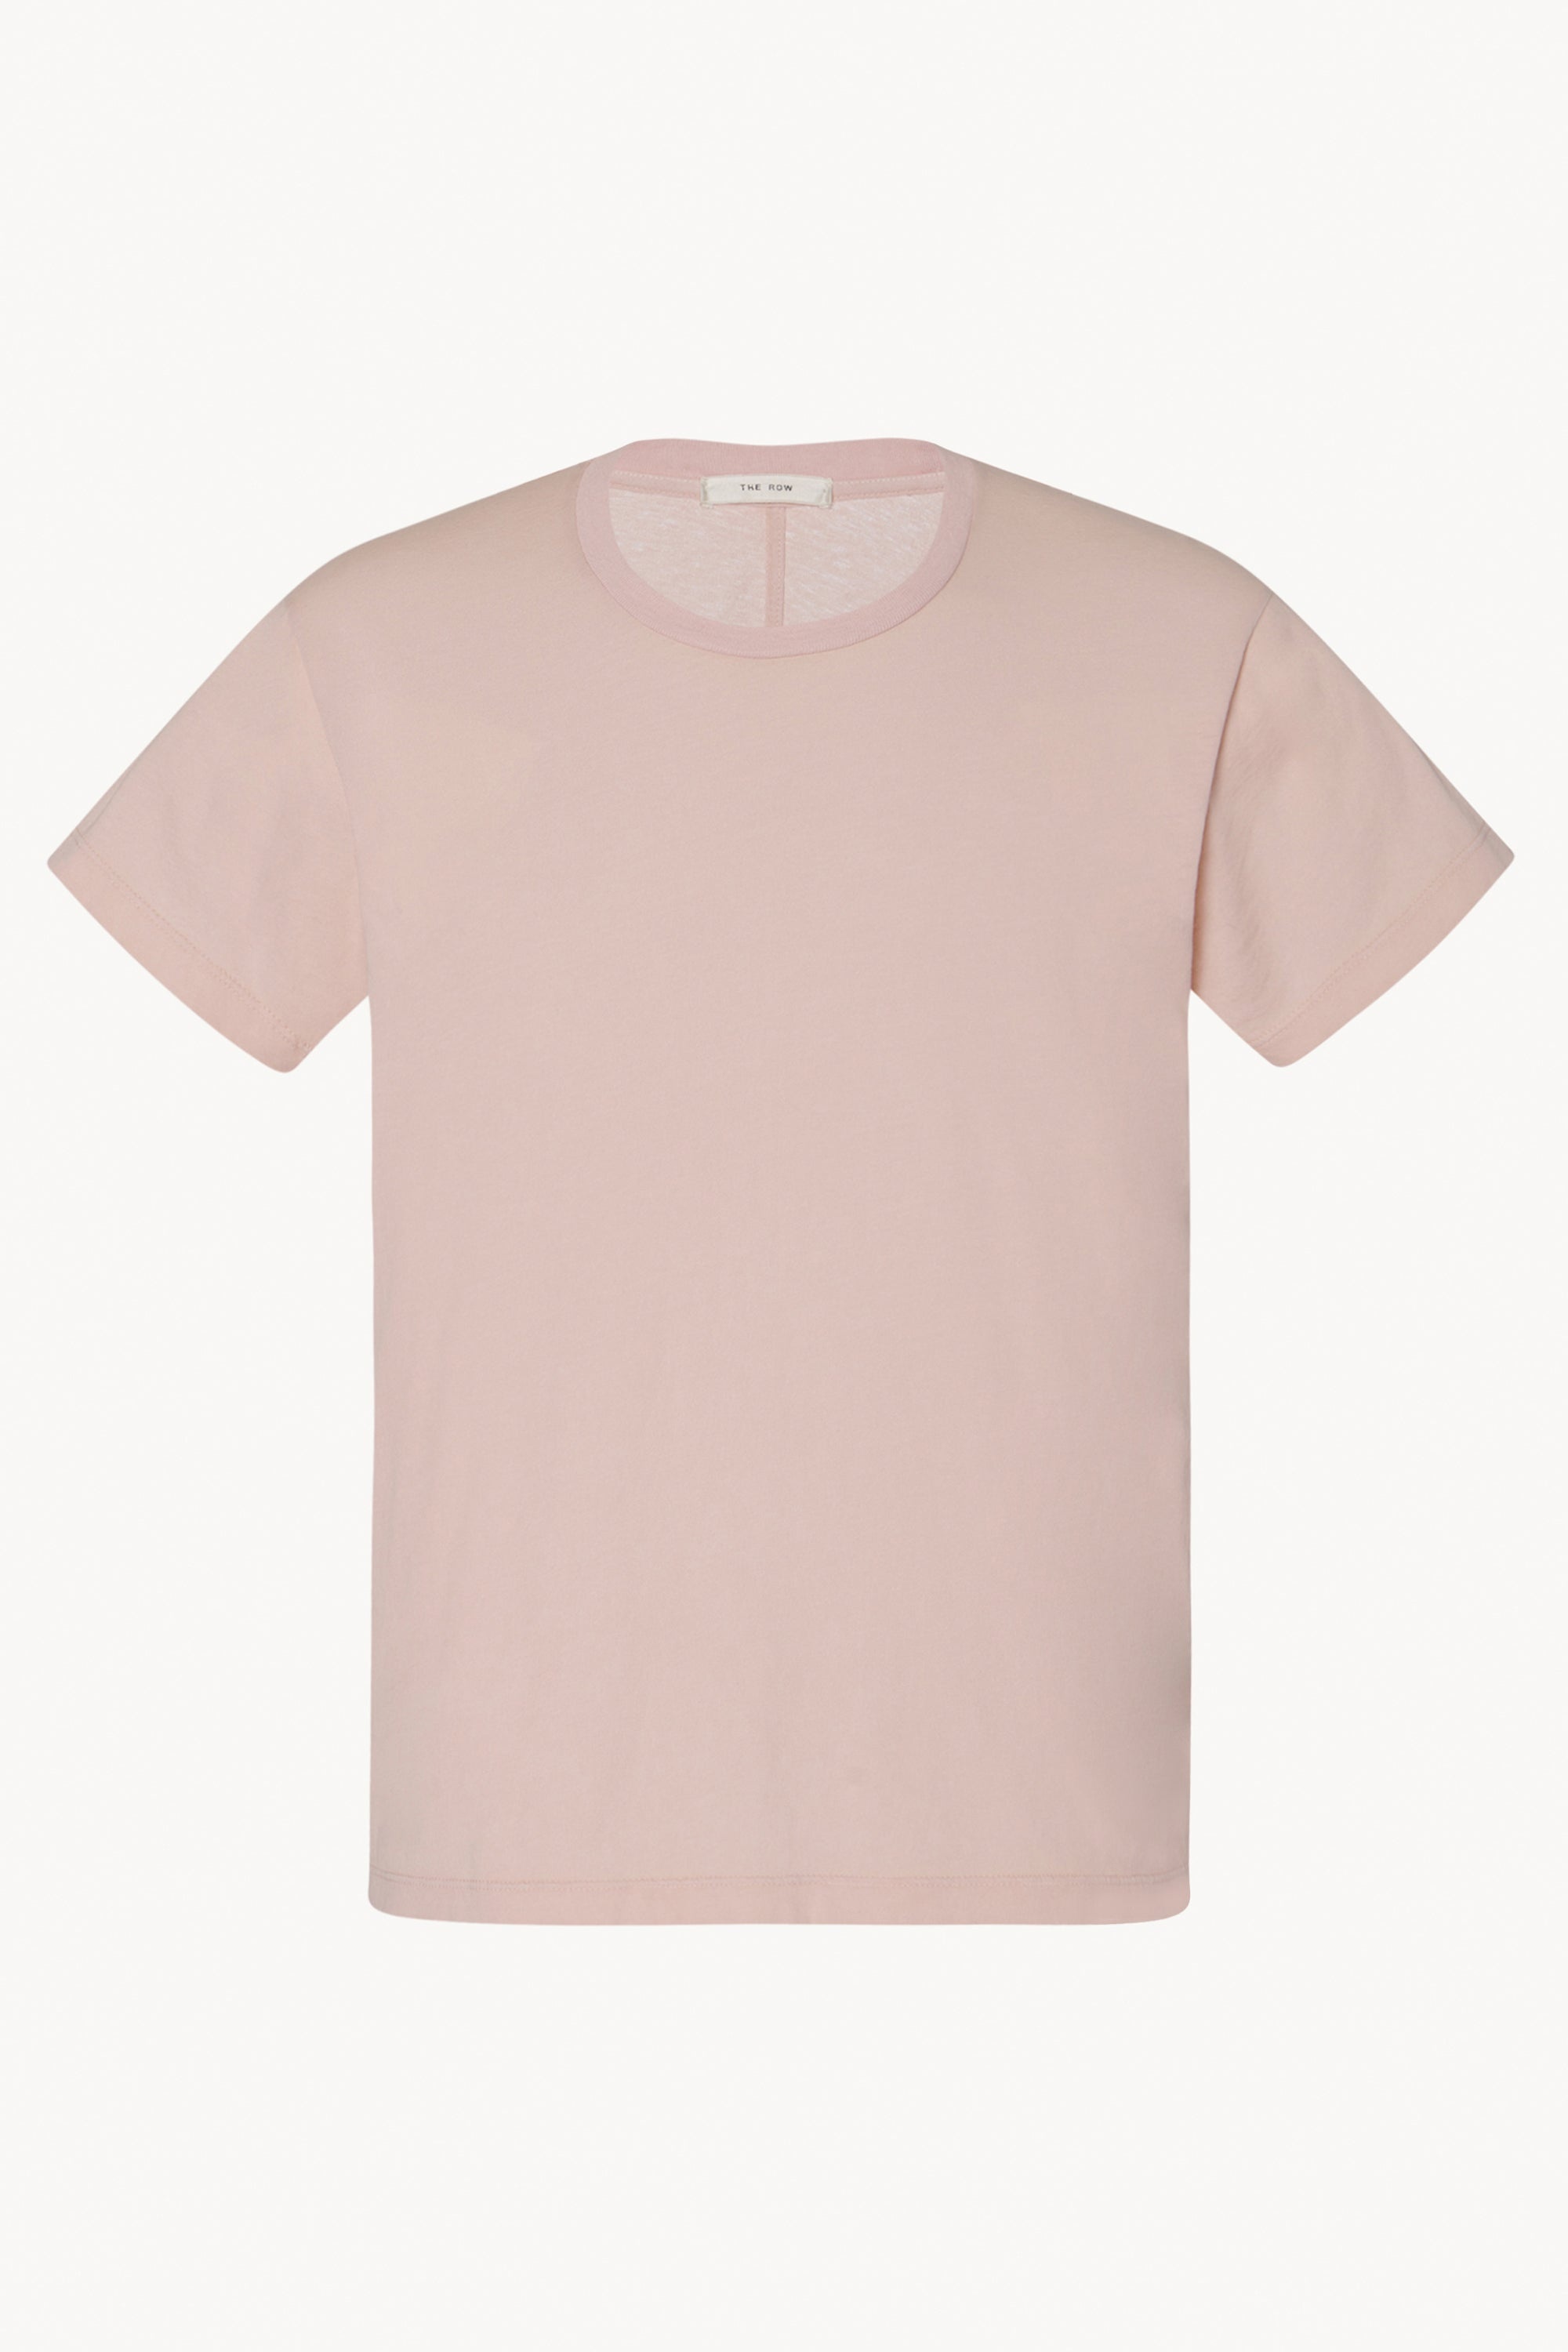 Blaine Top in Cotton - 1